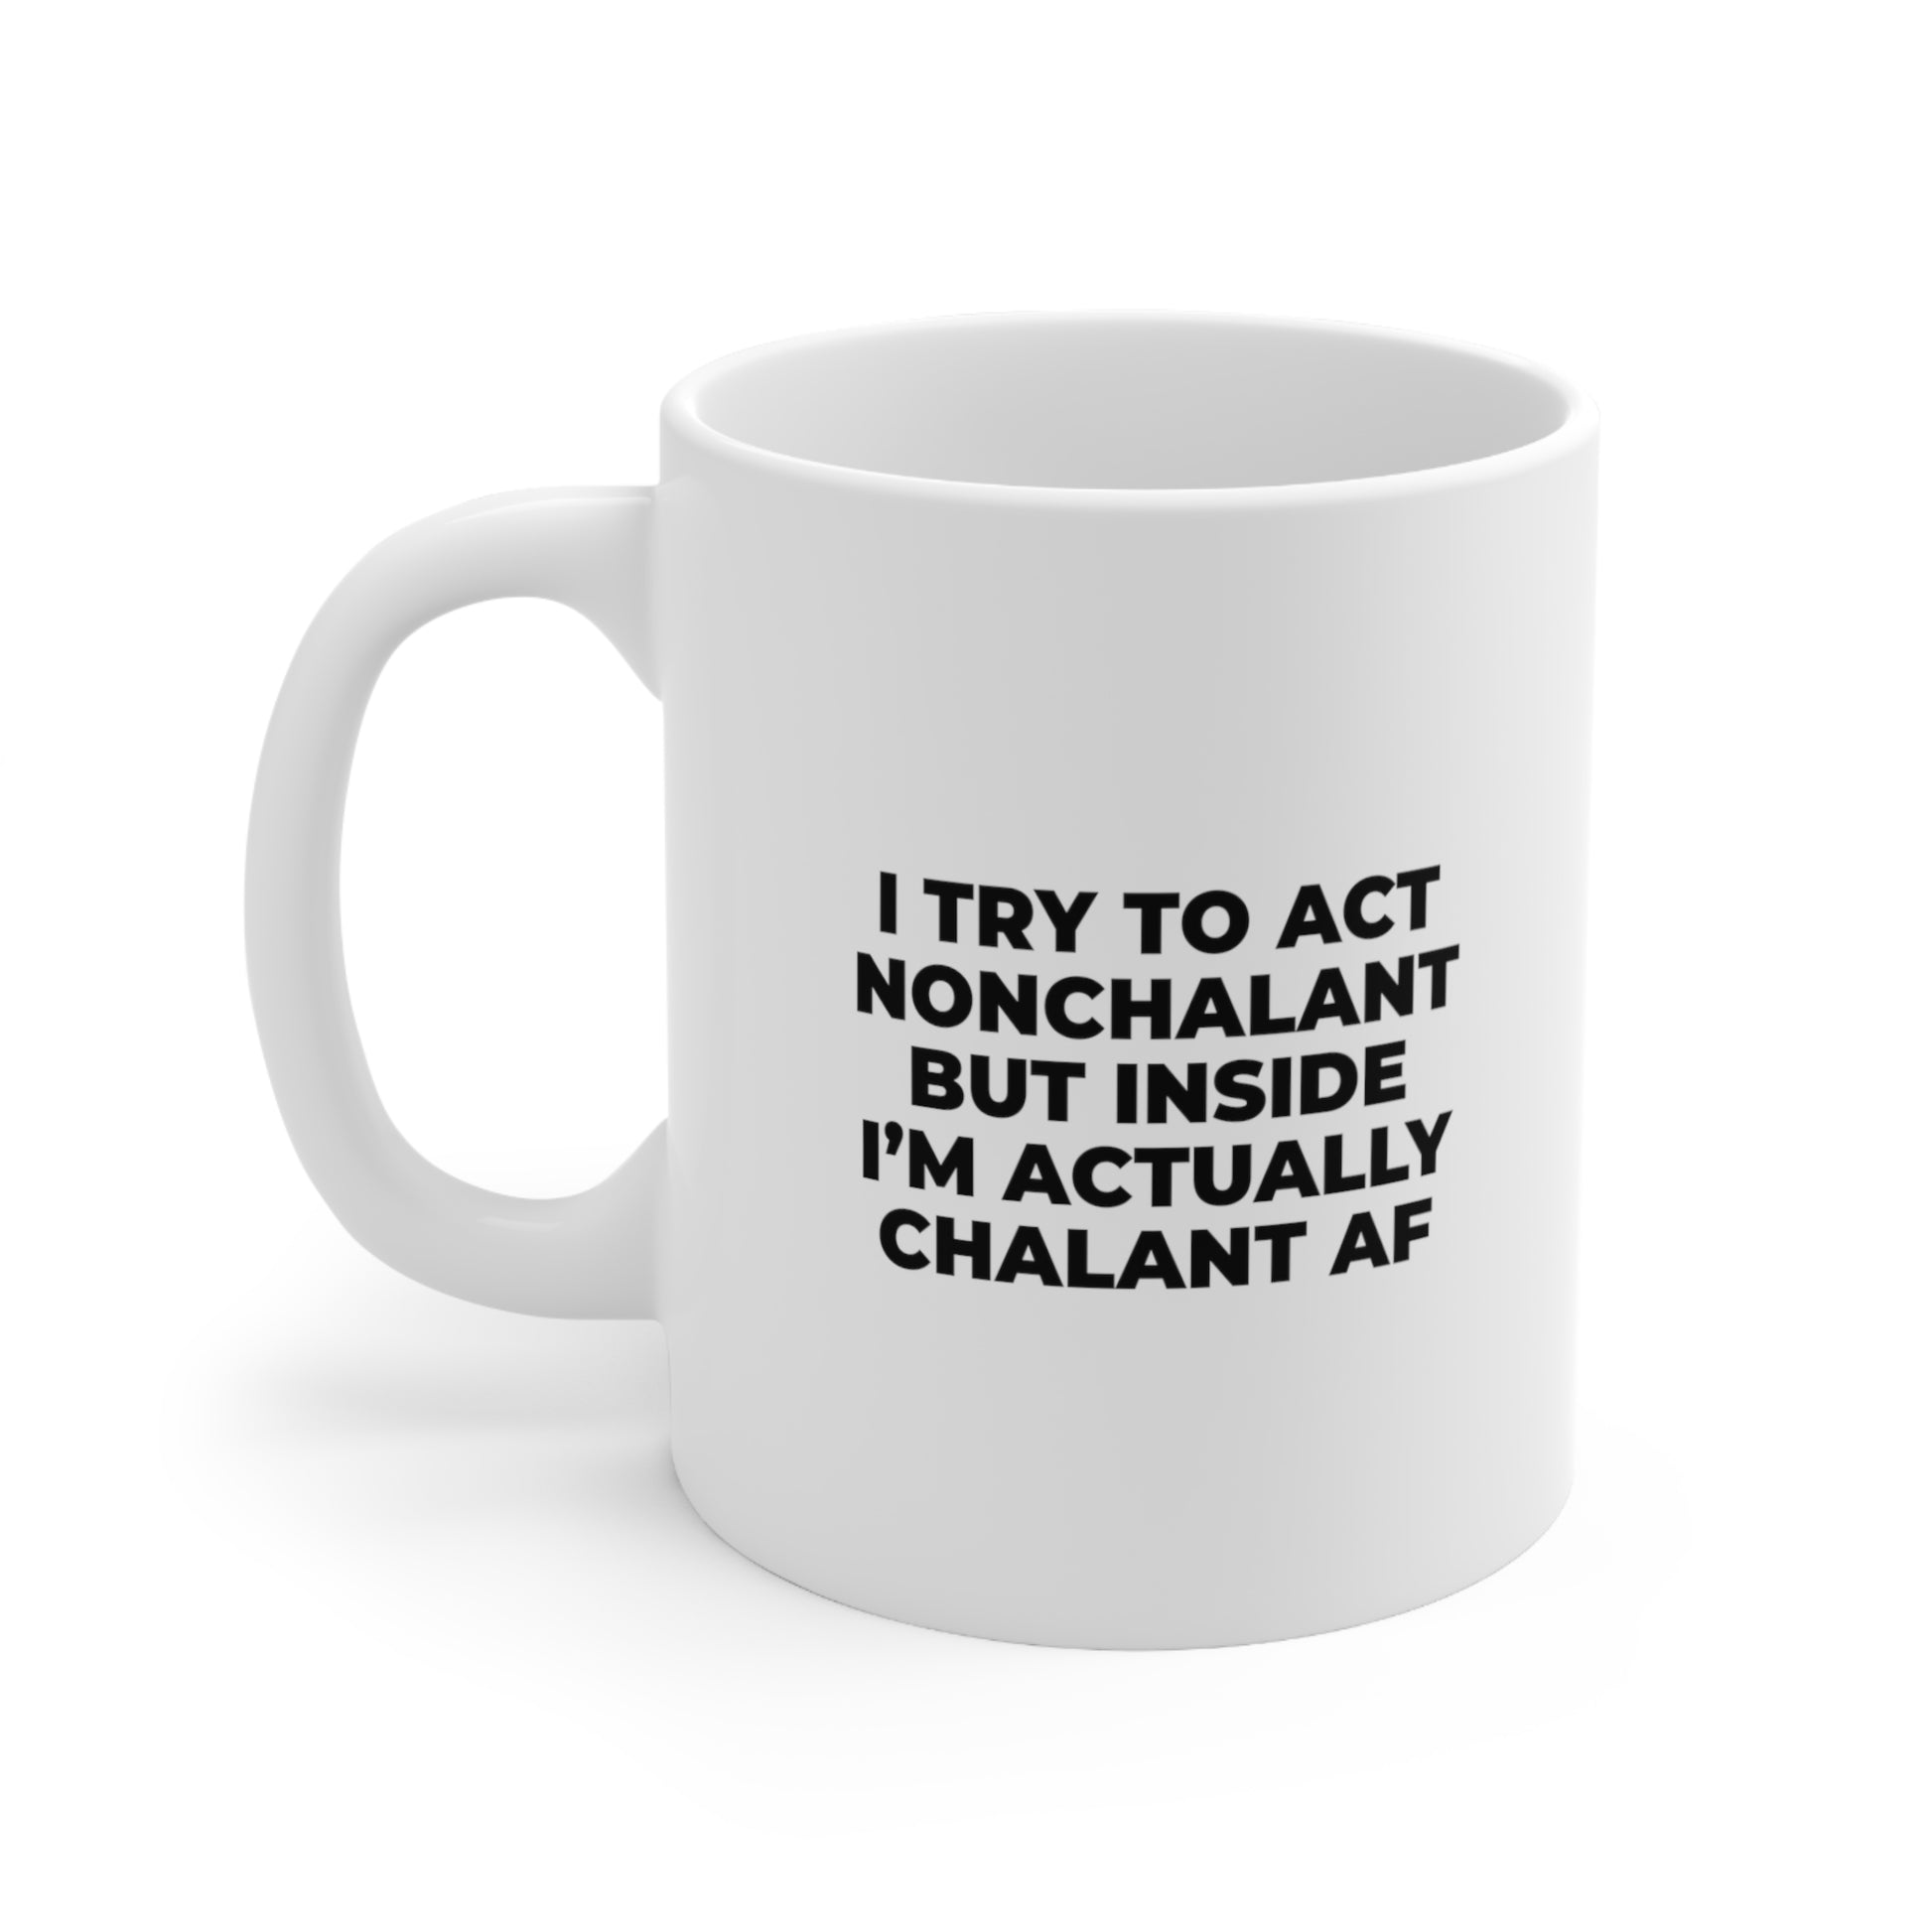 I try to act nonchalant but inside I am actually chalant AF Coffee Mug